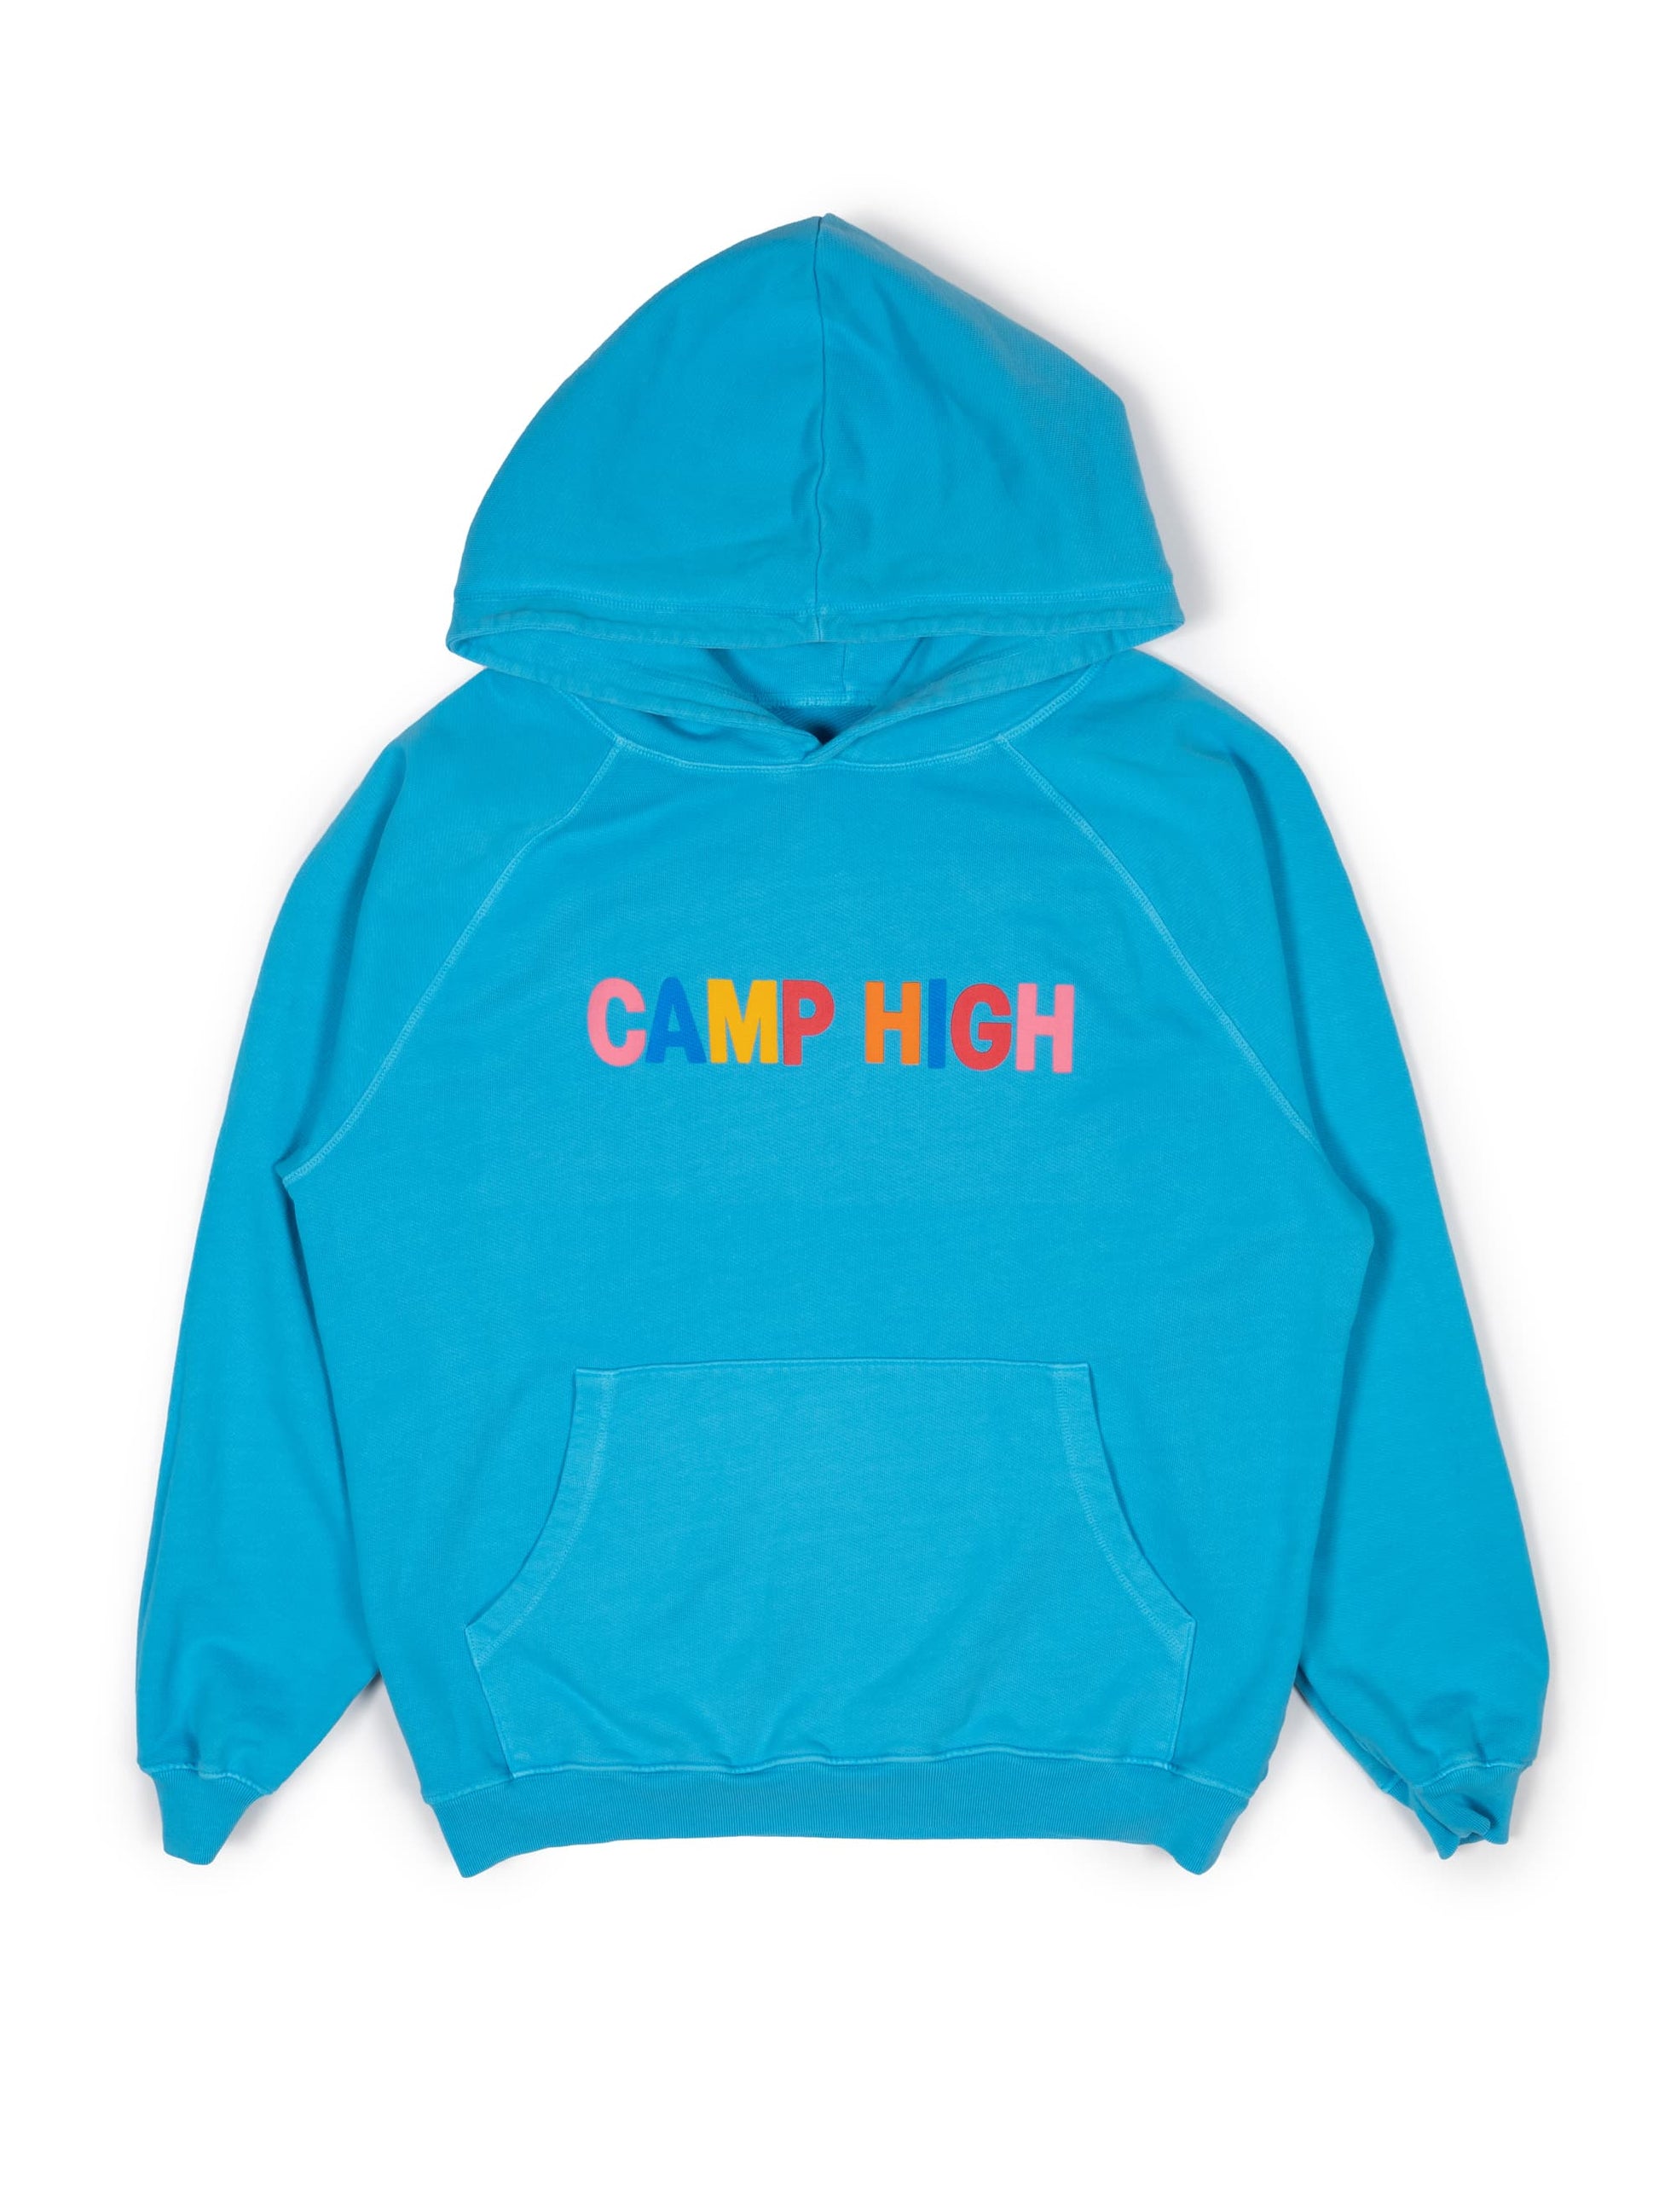 Camp High Small / Cyan Blue Will Rogers Hoody